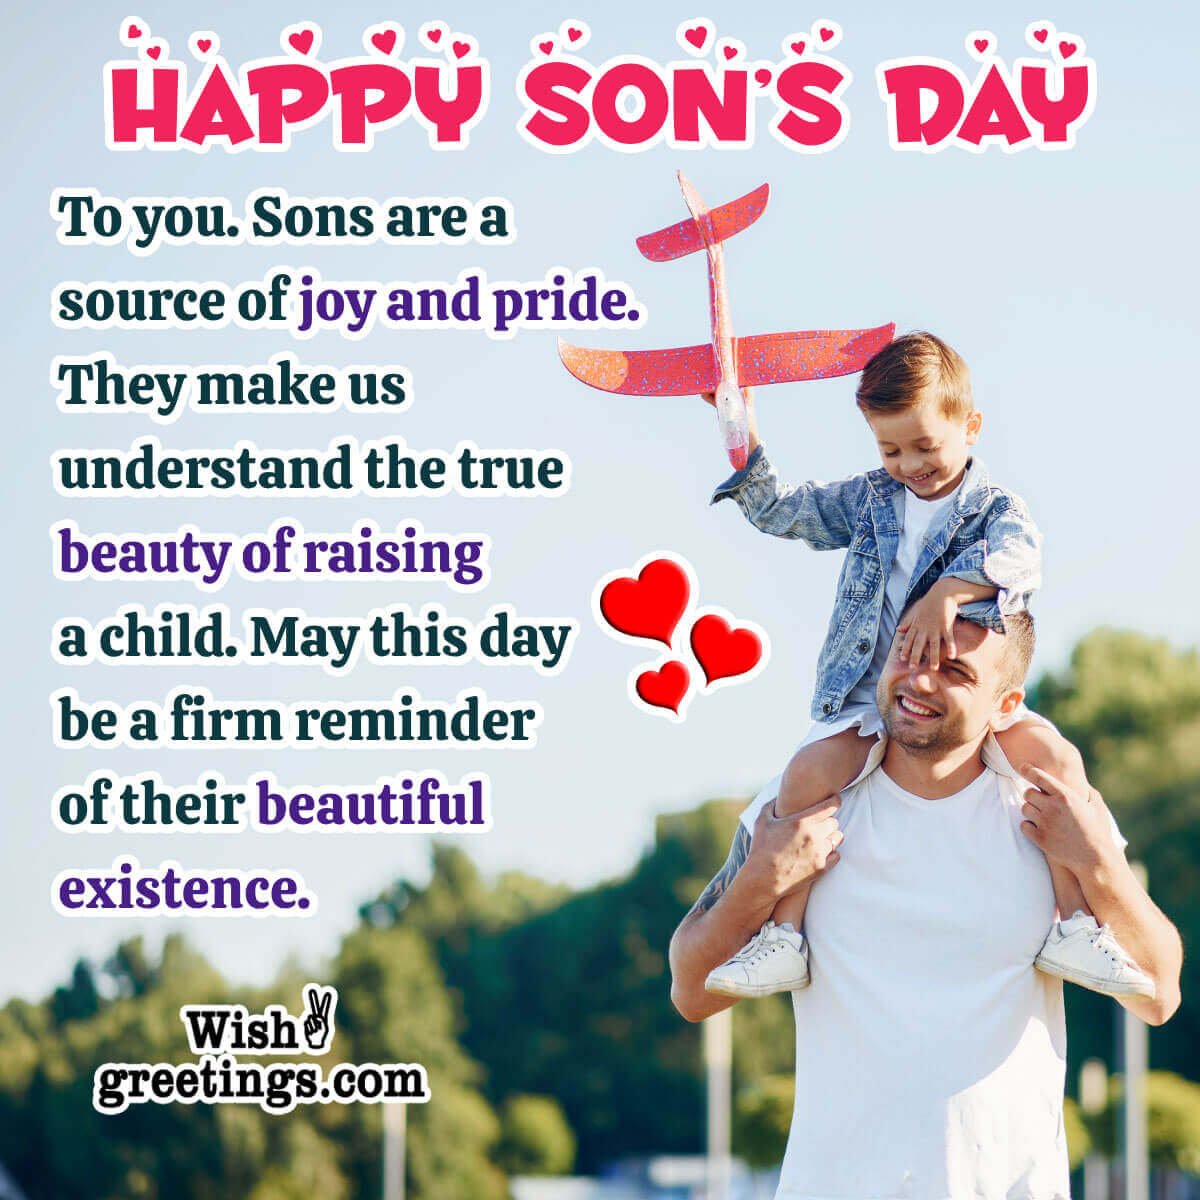 Happy Son’s Day Message Photo